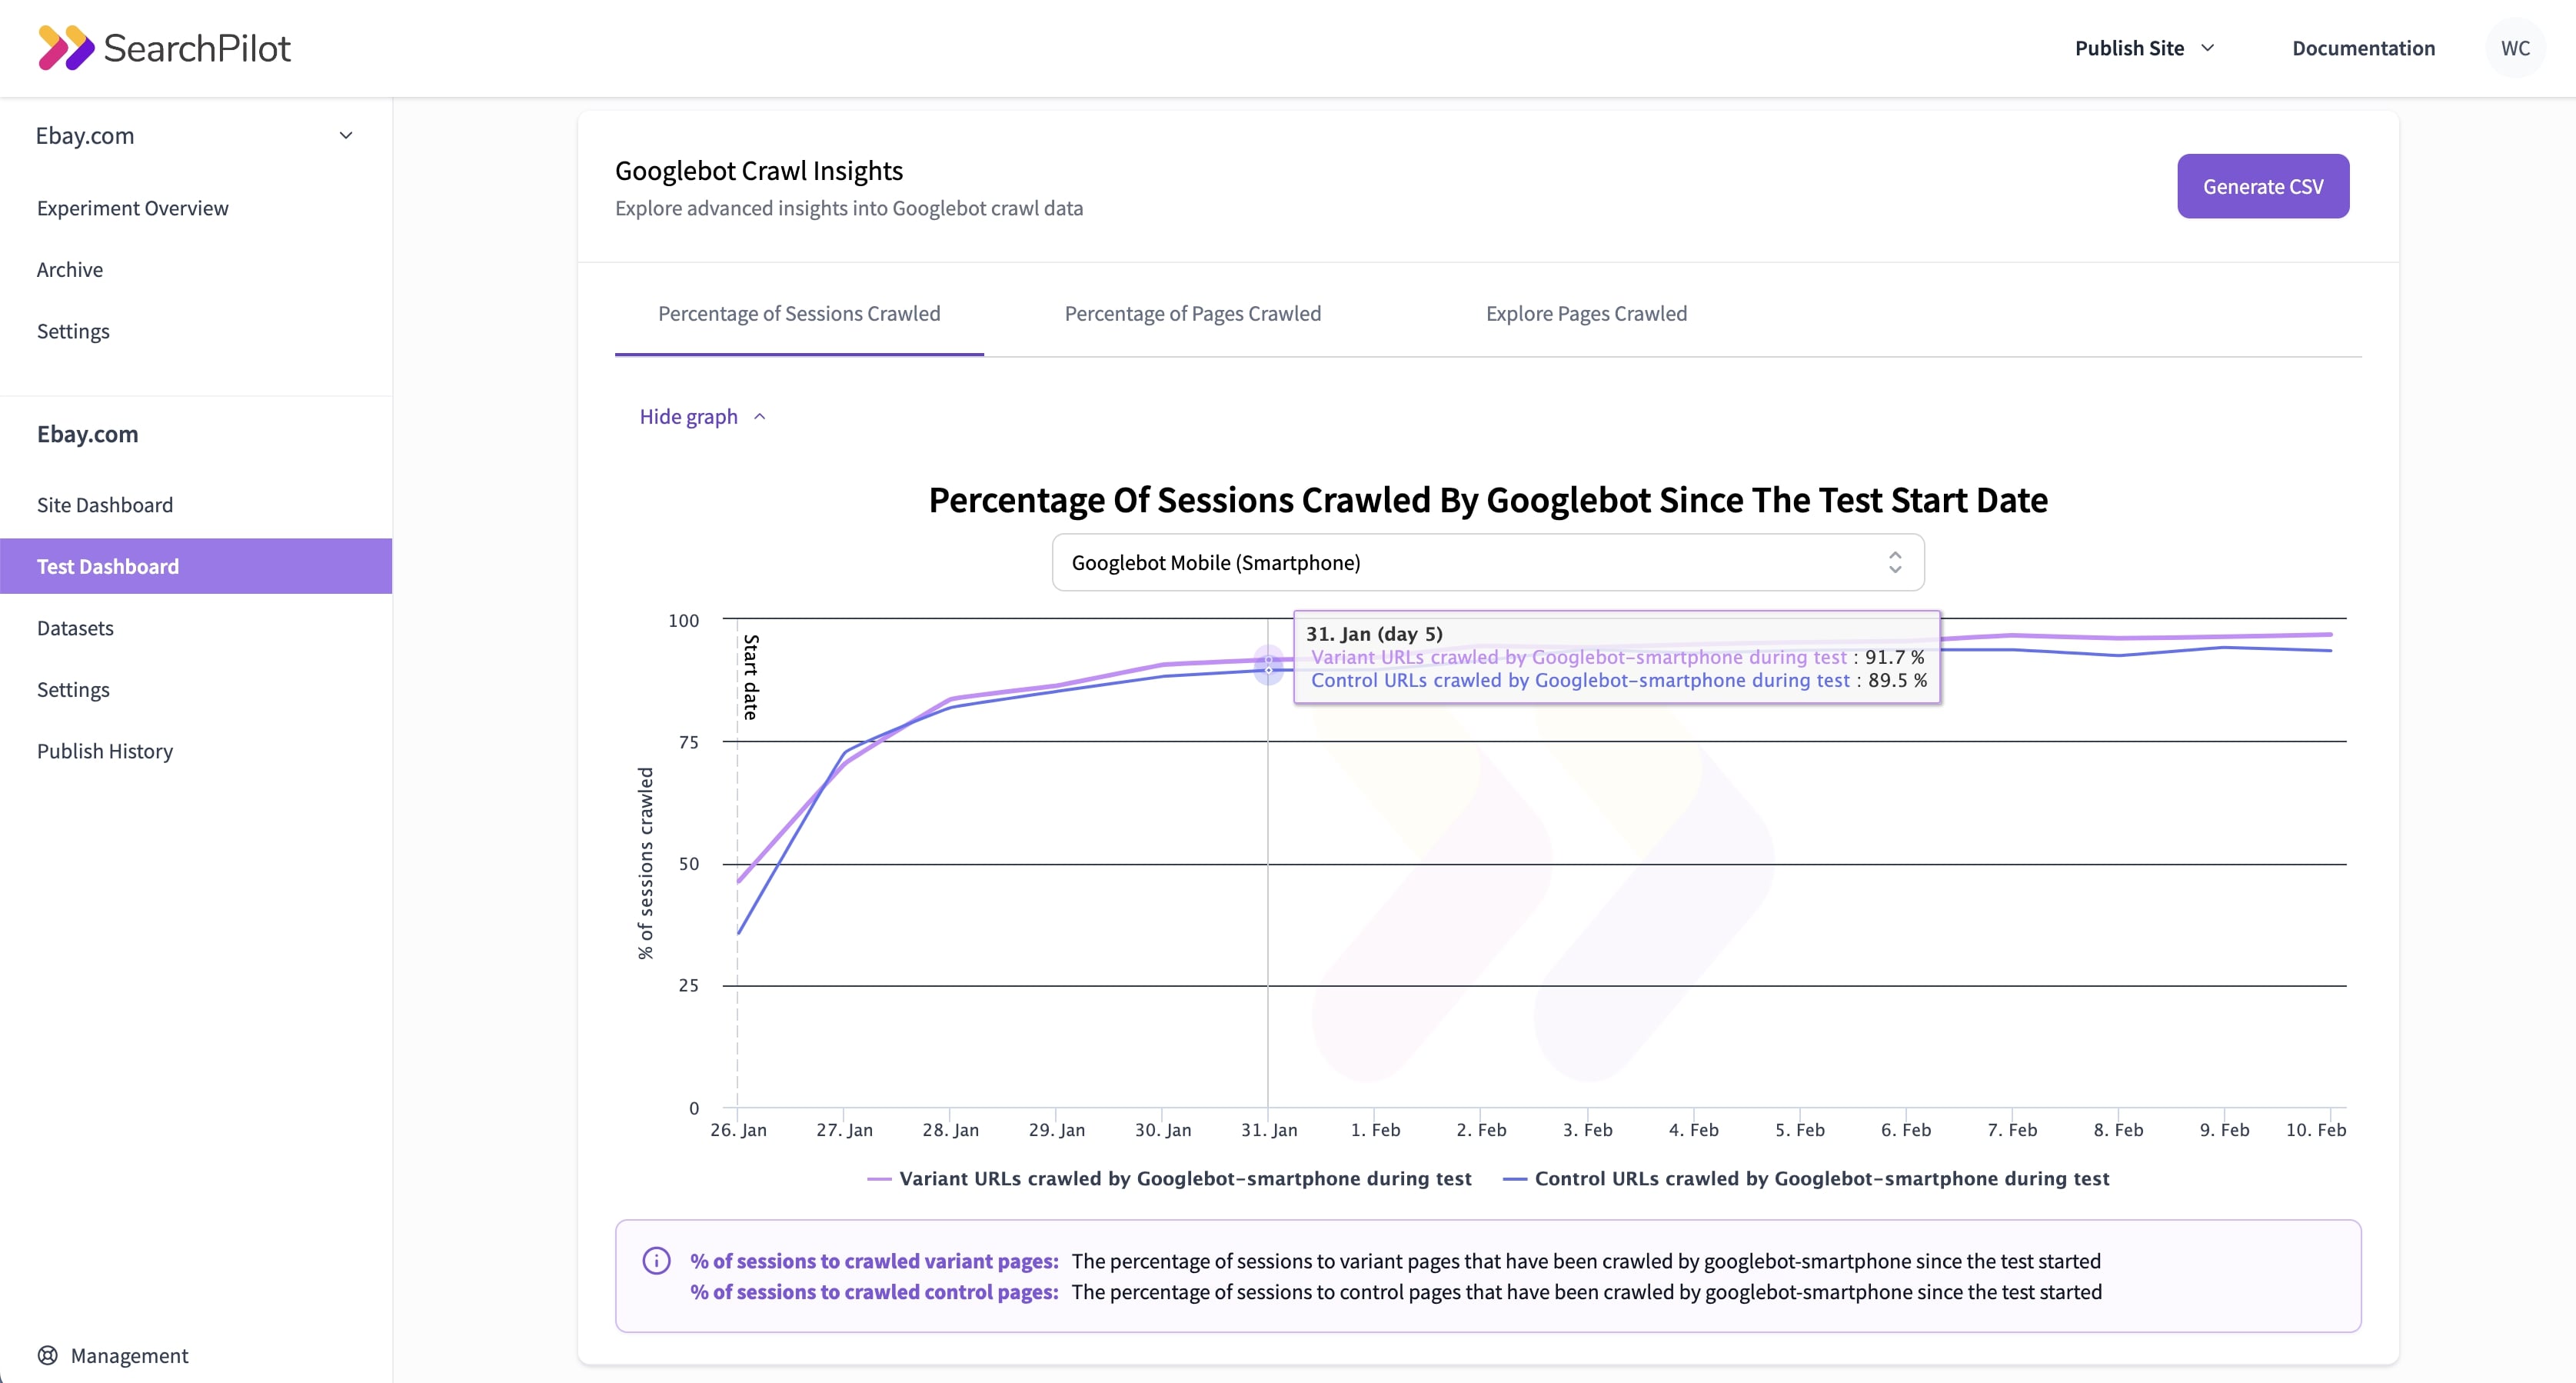 Image showcasing the Percentage Of Sessions Crawled By Googlebot Since The Test Start Date data